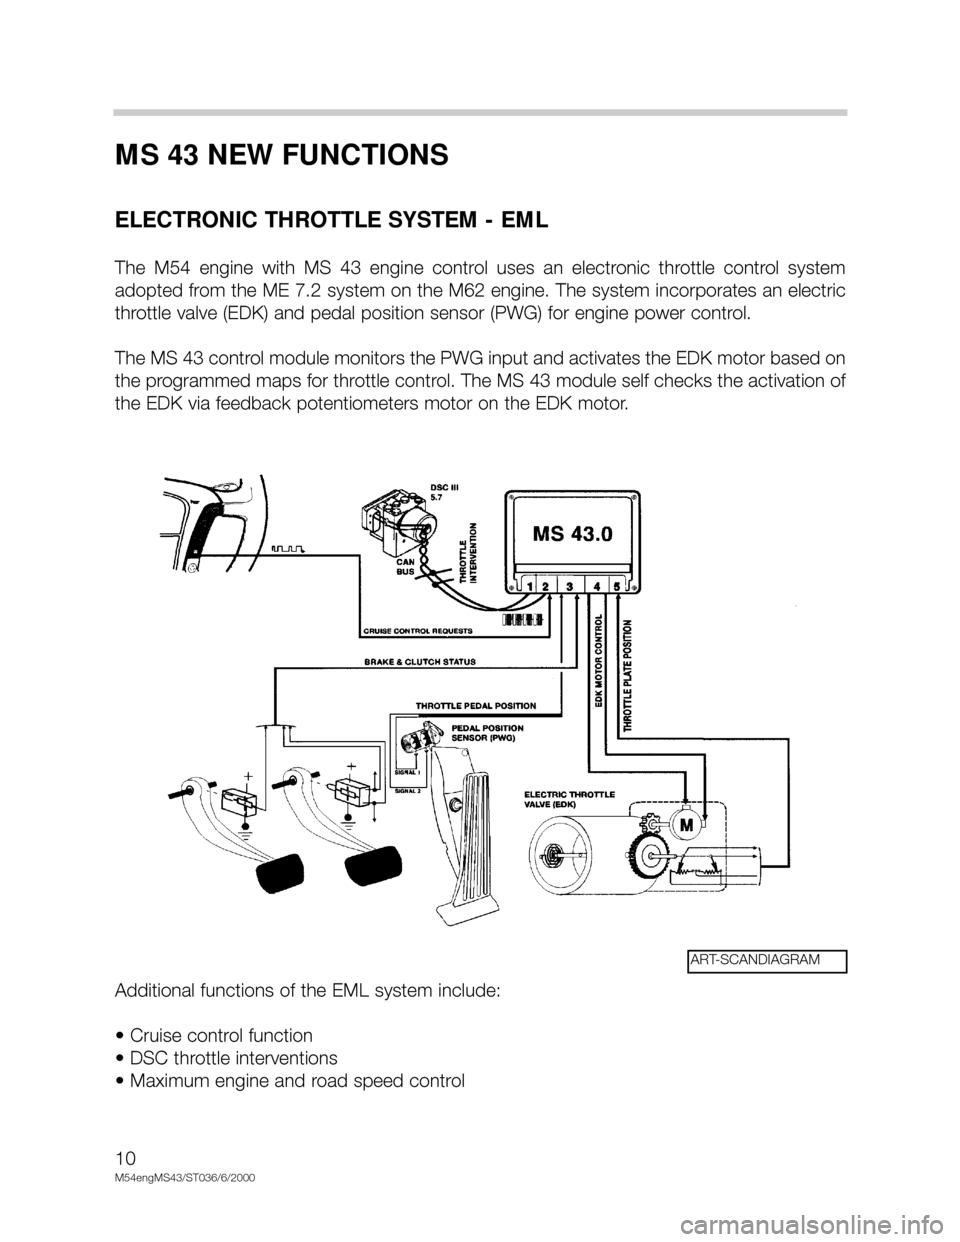 BMW X5 2002 E53 M54 Engine Workshop Manual 10
M54engMS43/ST036/6/2000
MS 43 NEW FUNCTIONS
ELECTRONIC THROTTLE SYSTEM - EML
The  M54  engine  with  MS  43  engine  control  uses  an  electronic  throttle  control  system
adopted from the ME 7.2